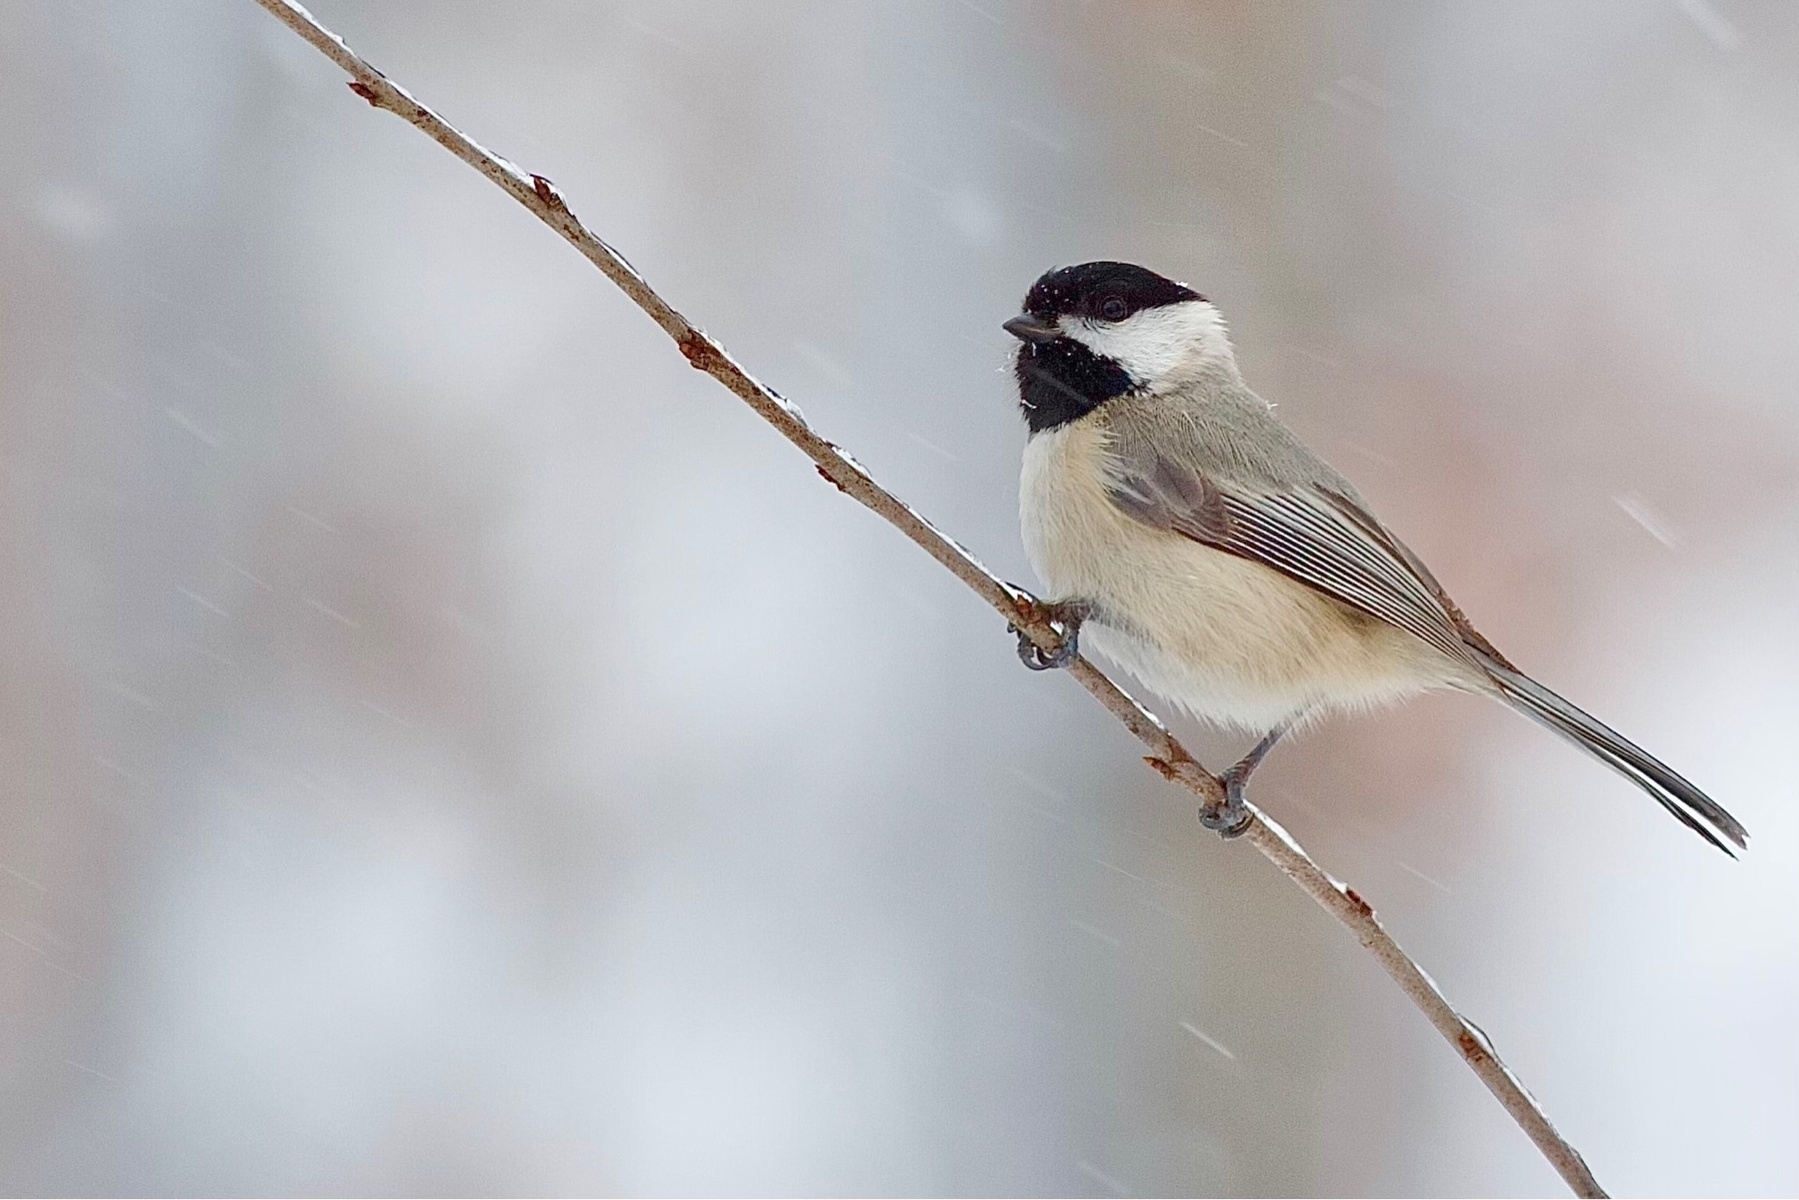 A  small gray and white bird with a black head is perched on branch. Blurred snow flakes can be seen falling around the bird.